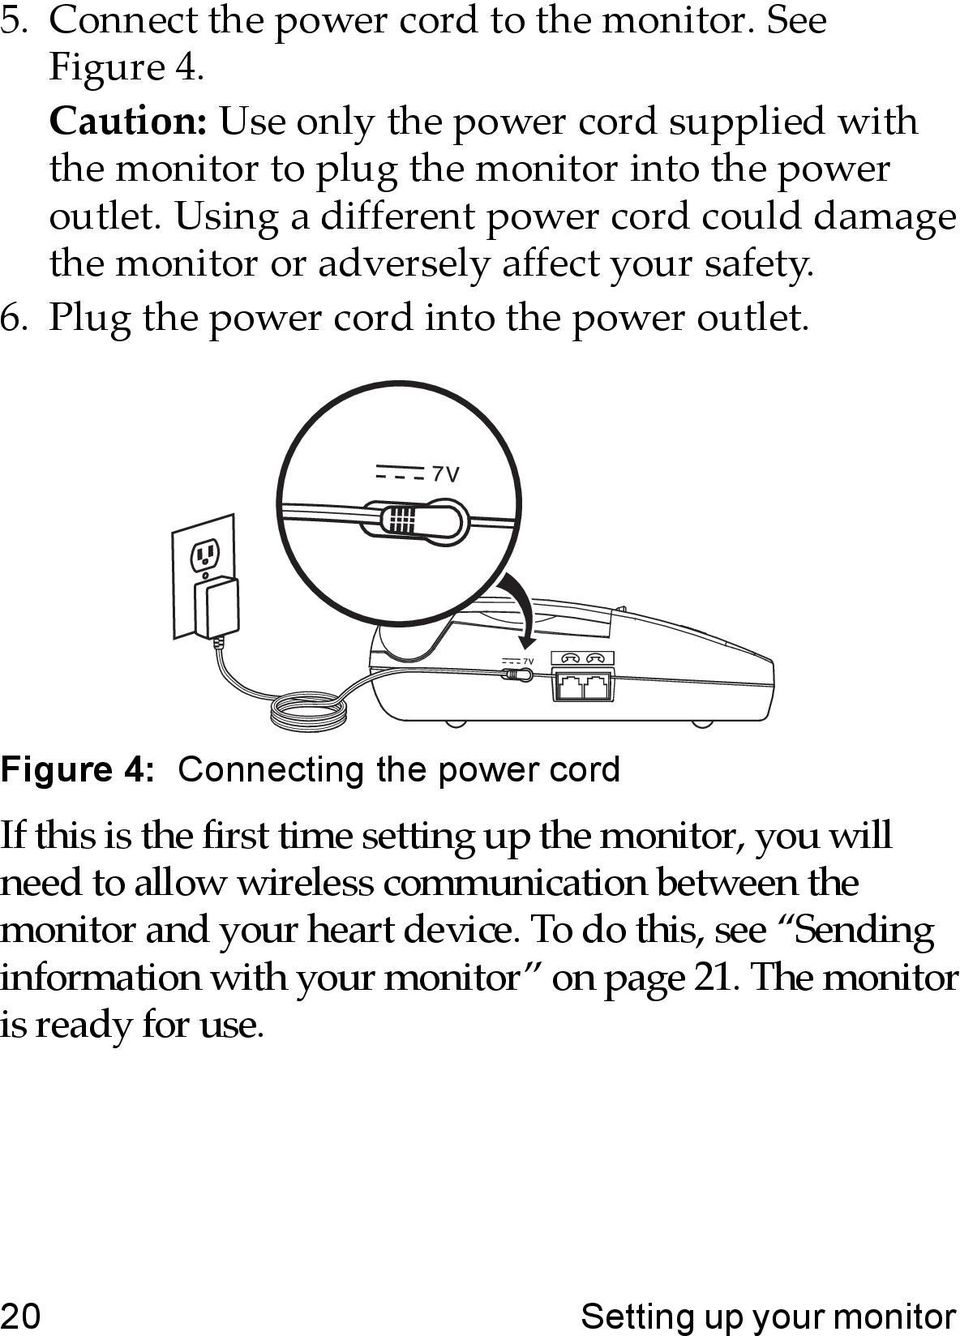 Using a different power cord could damage the monitor or adversely affect your safety. 6. Plug the power cord into the power outlet.